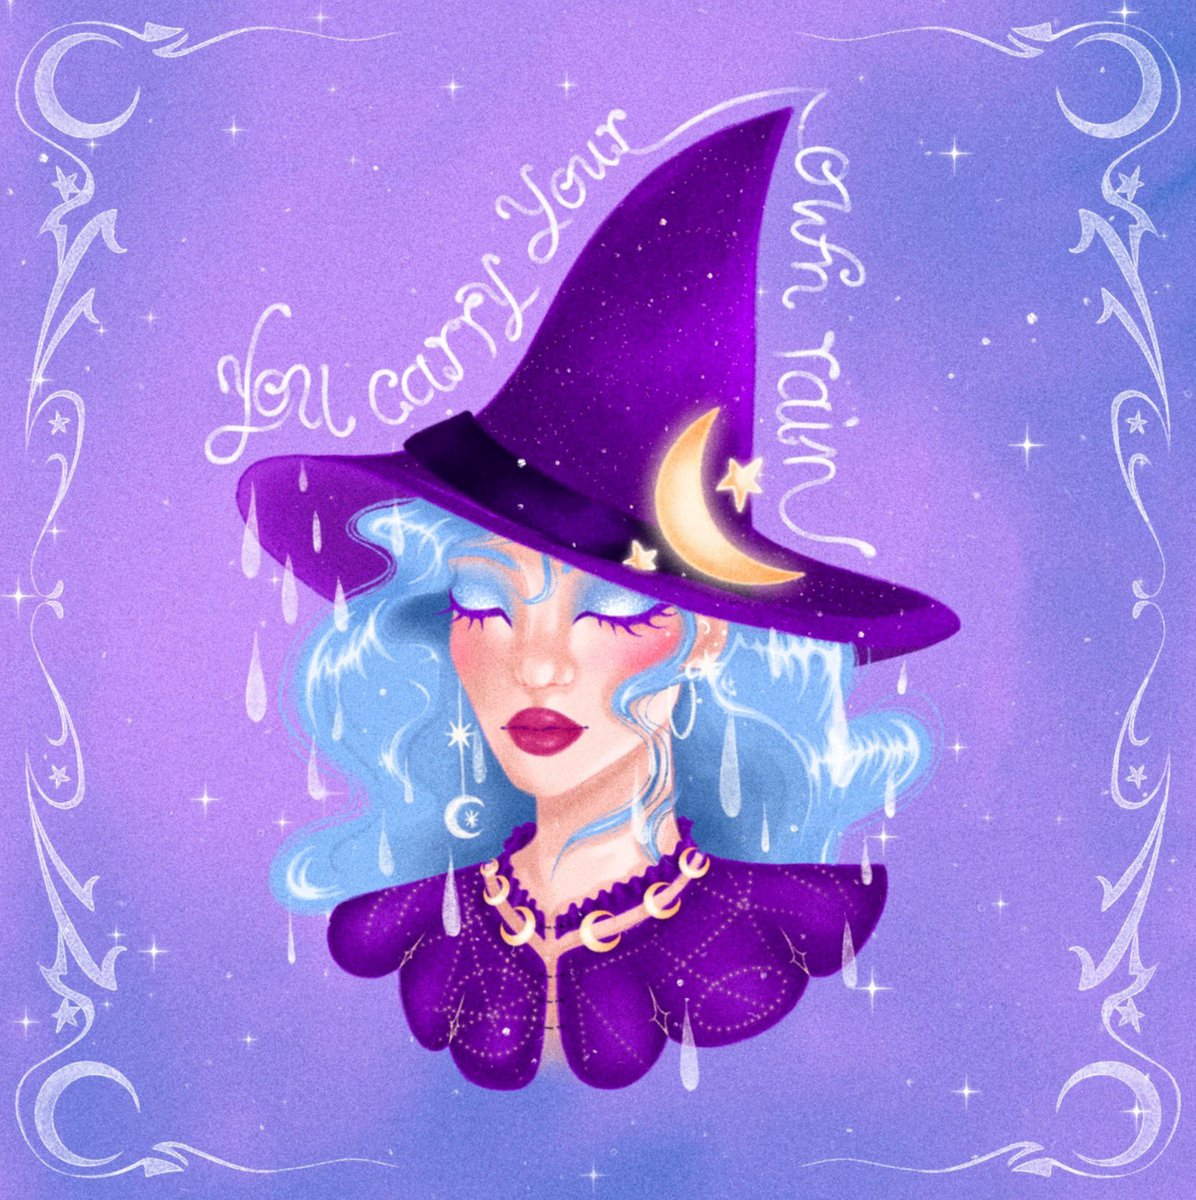 ☂️💧 𝙮𝙤𝙪 𝙘𝙖𝙧𝙧𝙮 𝙮𝙤𝙪𝙧 𝙤𝙬𝙣 𝙧𝙖𝙞𝙣 💧☂️

#illustration #illustrationartists #drawing #witch #sorciere #magic #fantasy #witchaesthetic #pastelcolors #purple #mentalhealth #womenartists #illustrationjeunesse #witchy #whimsigoth #astrologywitch #moon #esotericismart